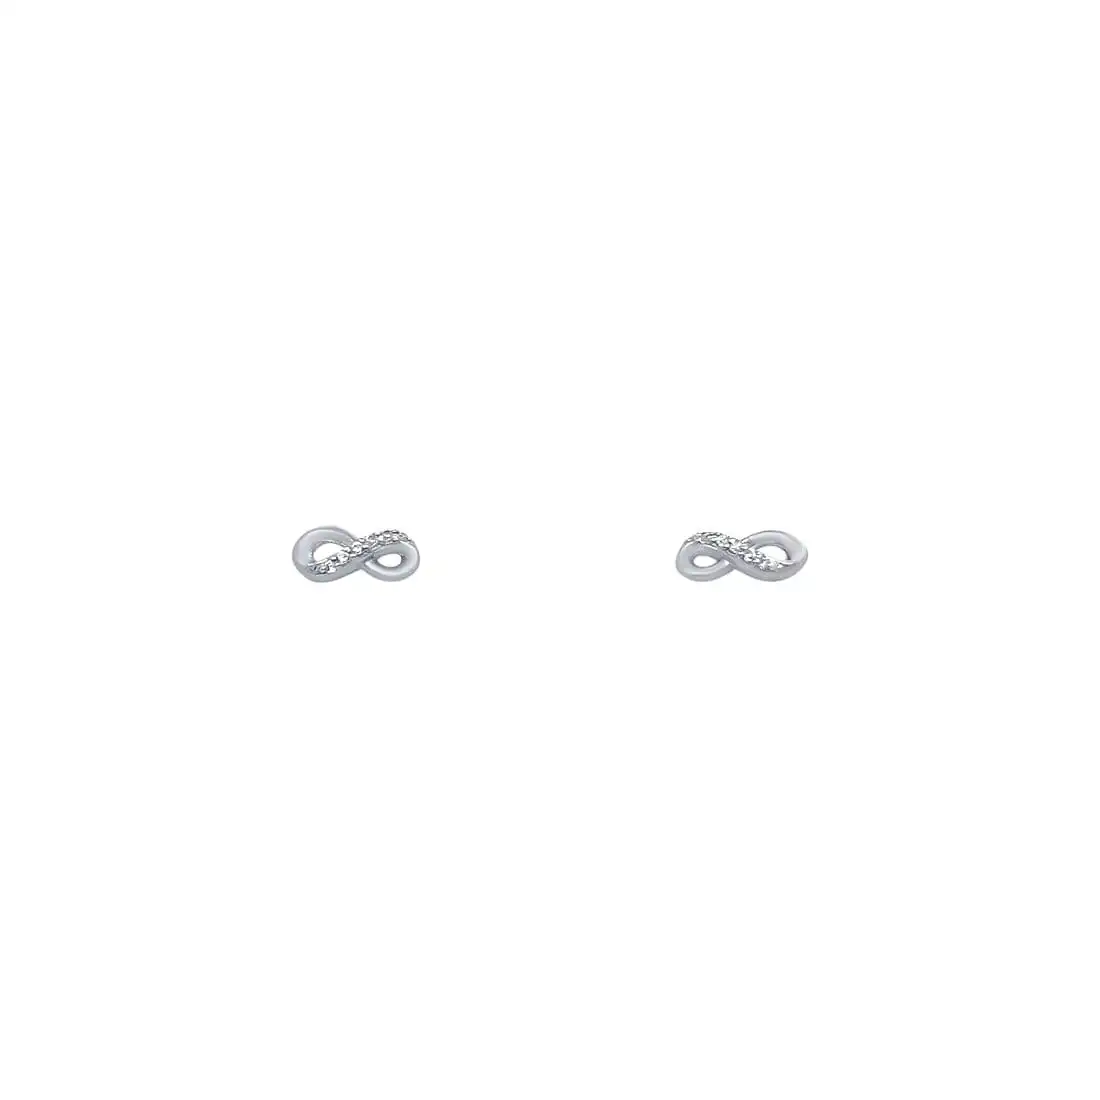 Children's Sterling Silver Infinity Stud Earrings with Cubic Zirconia